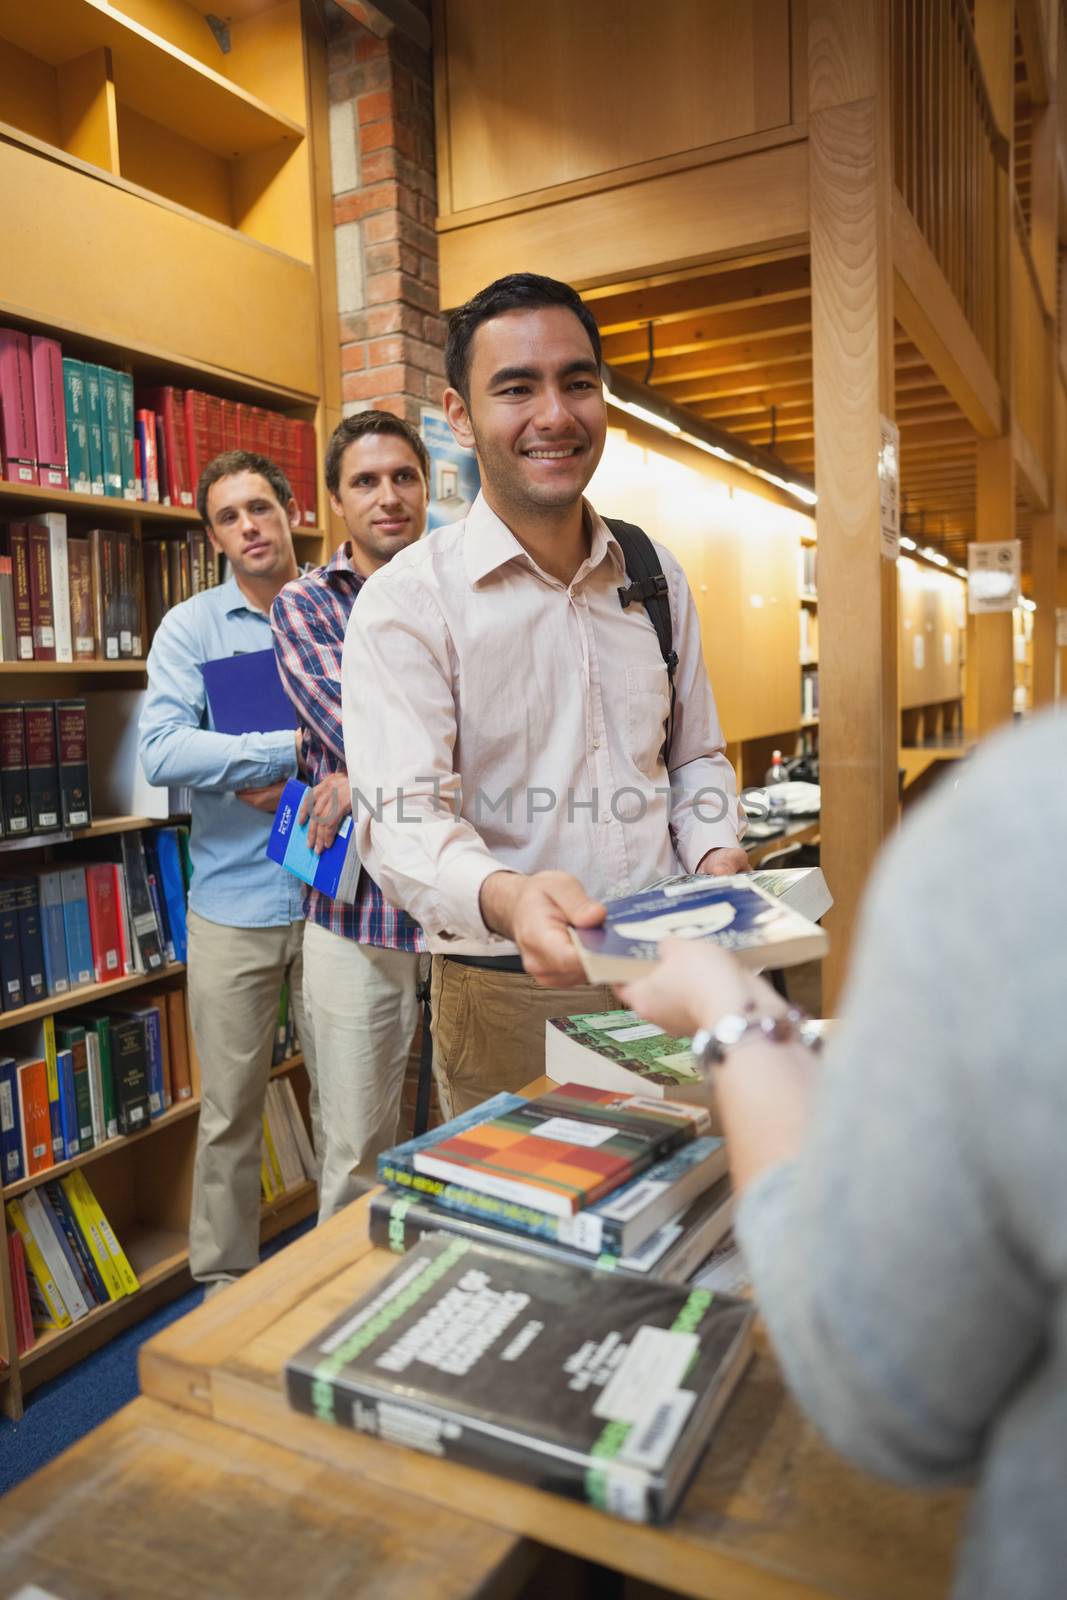 Attractive man handing a book to the female librarian by Wavebreakmedia